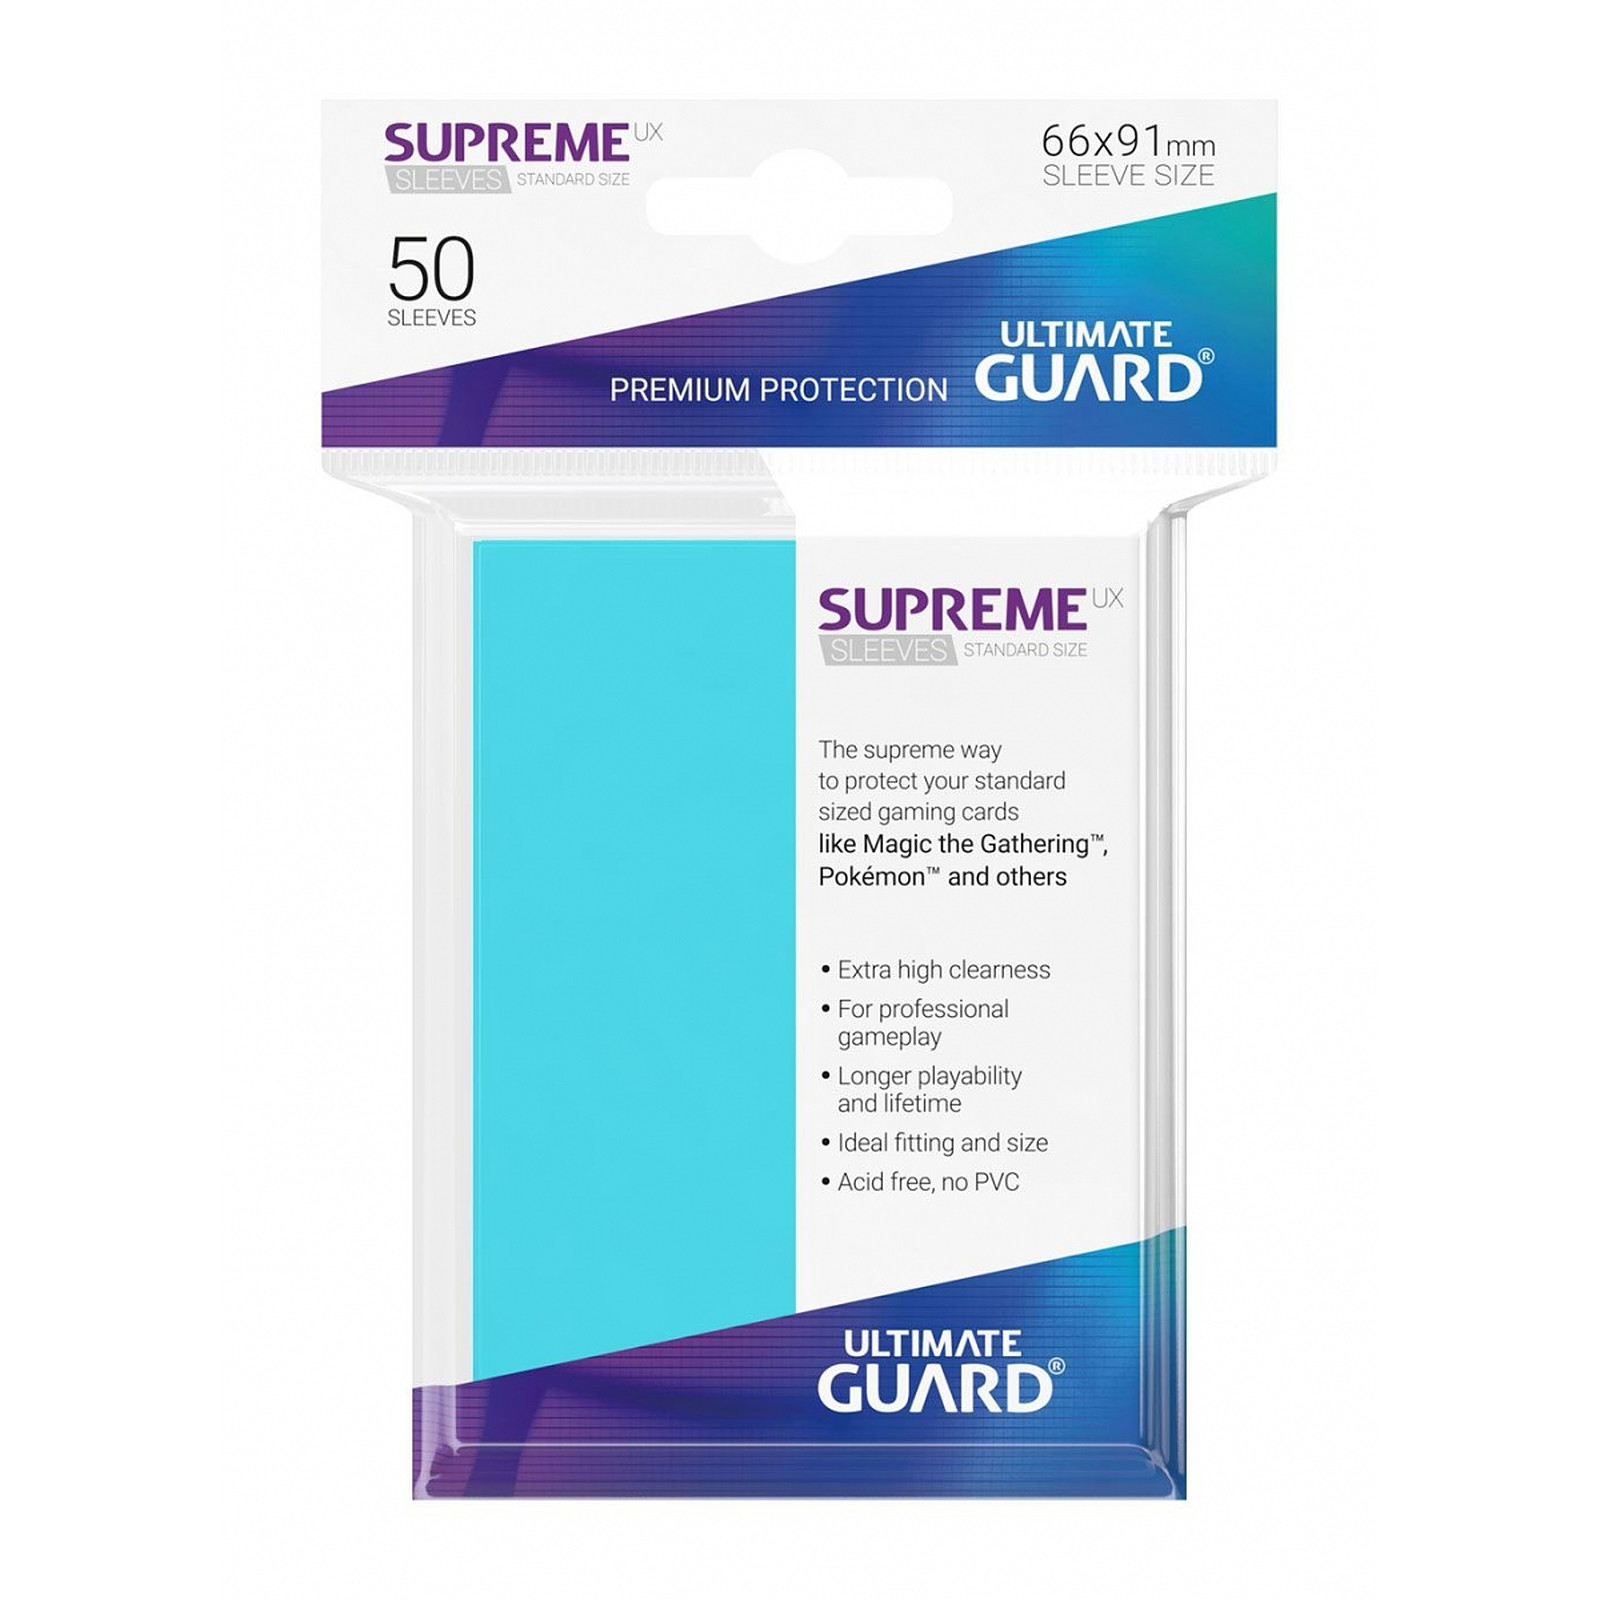 Ultimate Guard - 50 pochettes Supreme UX Sleeves taille standard Aigue-marine - Accessoire jeux Ultimate Guard